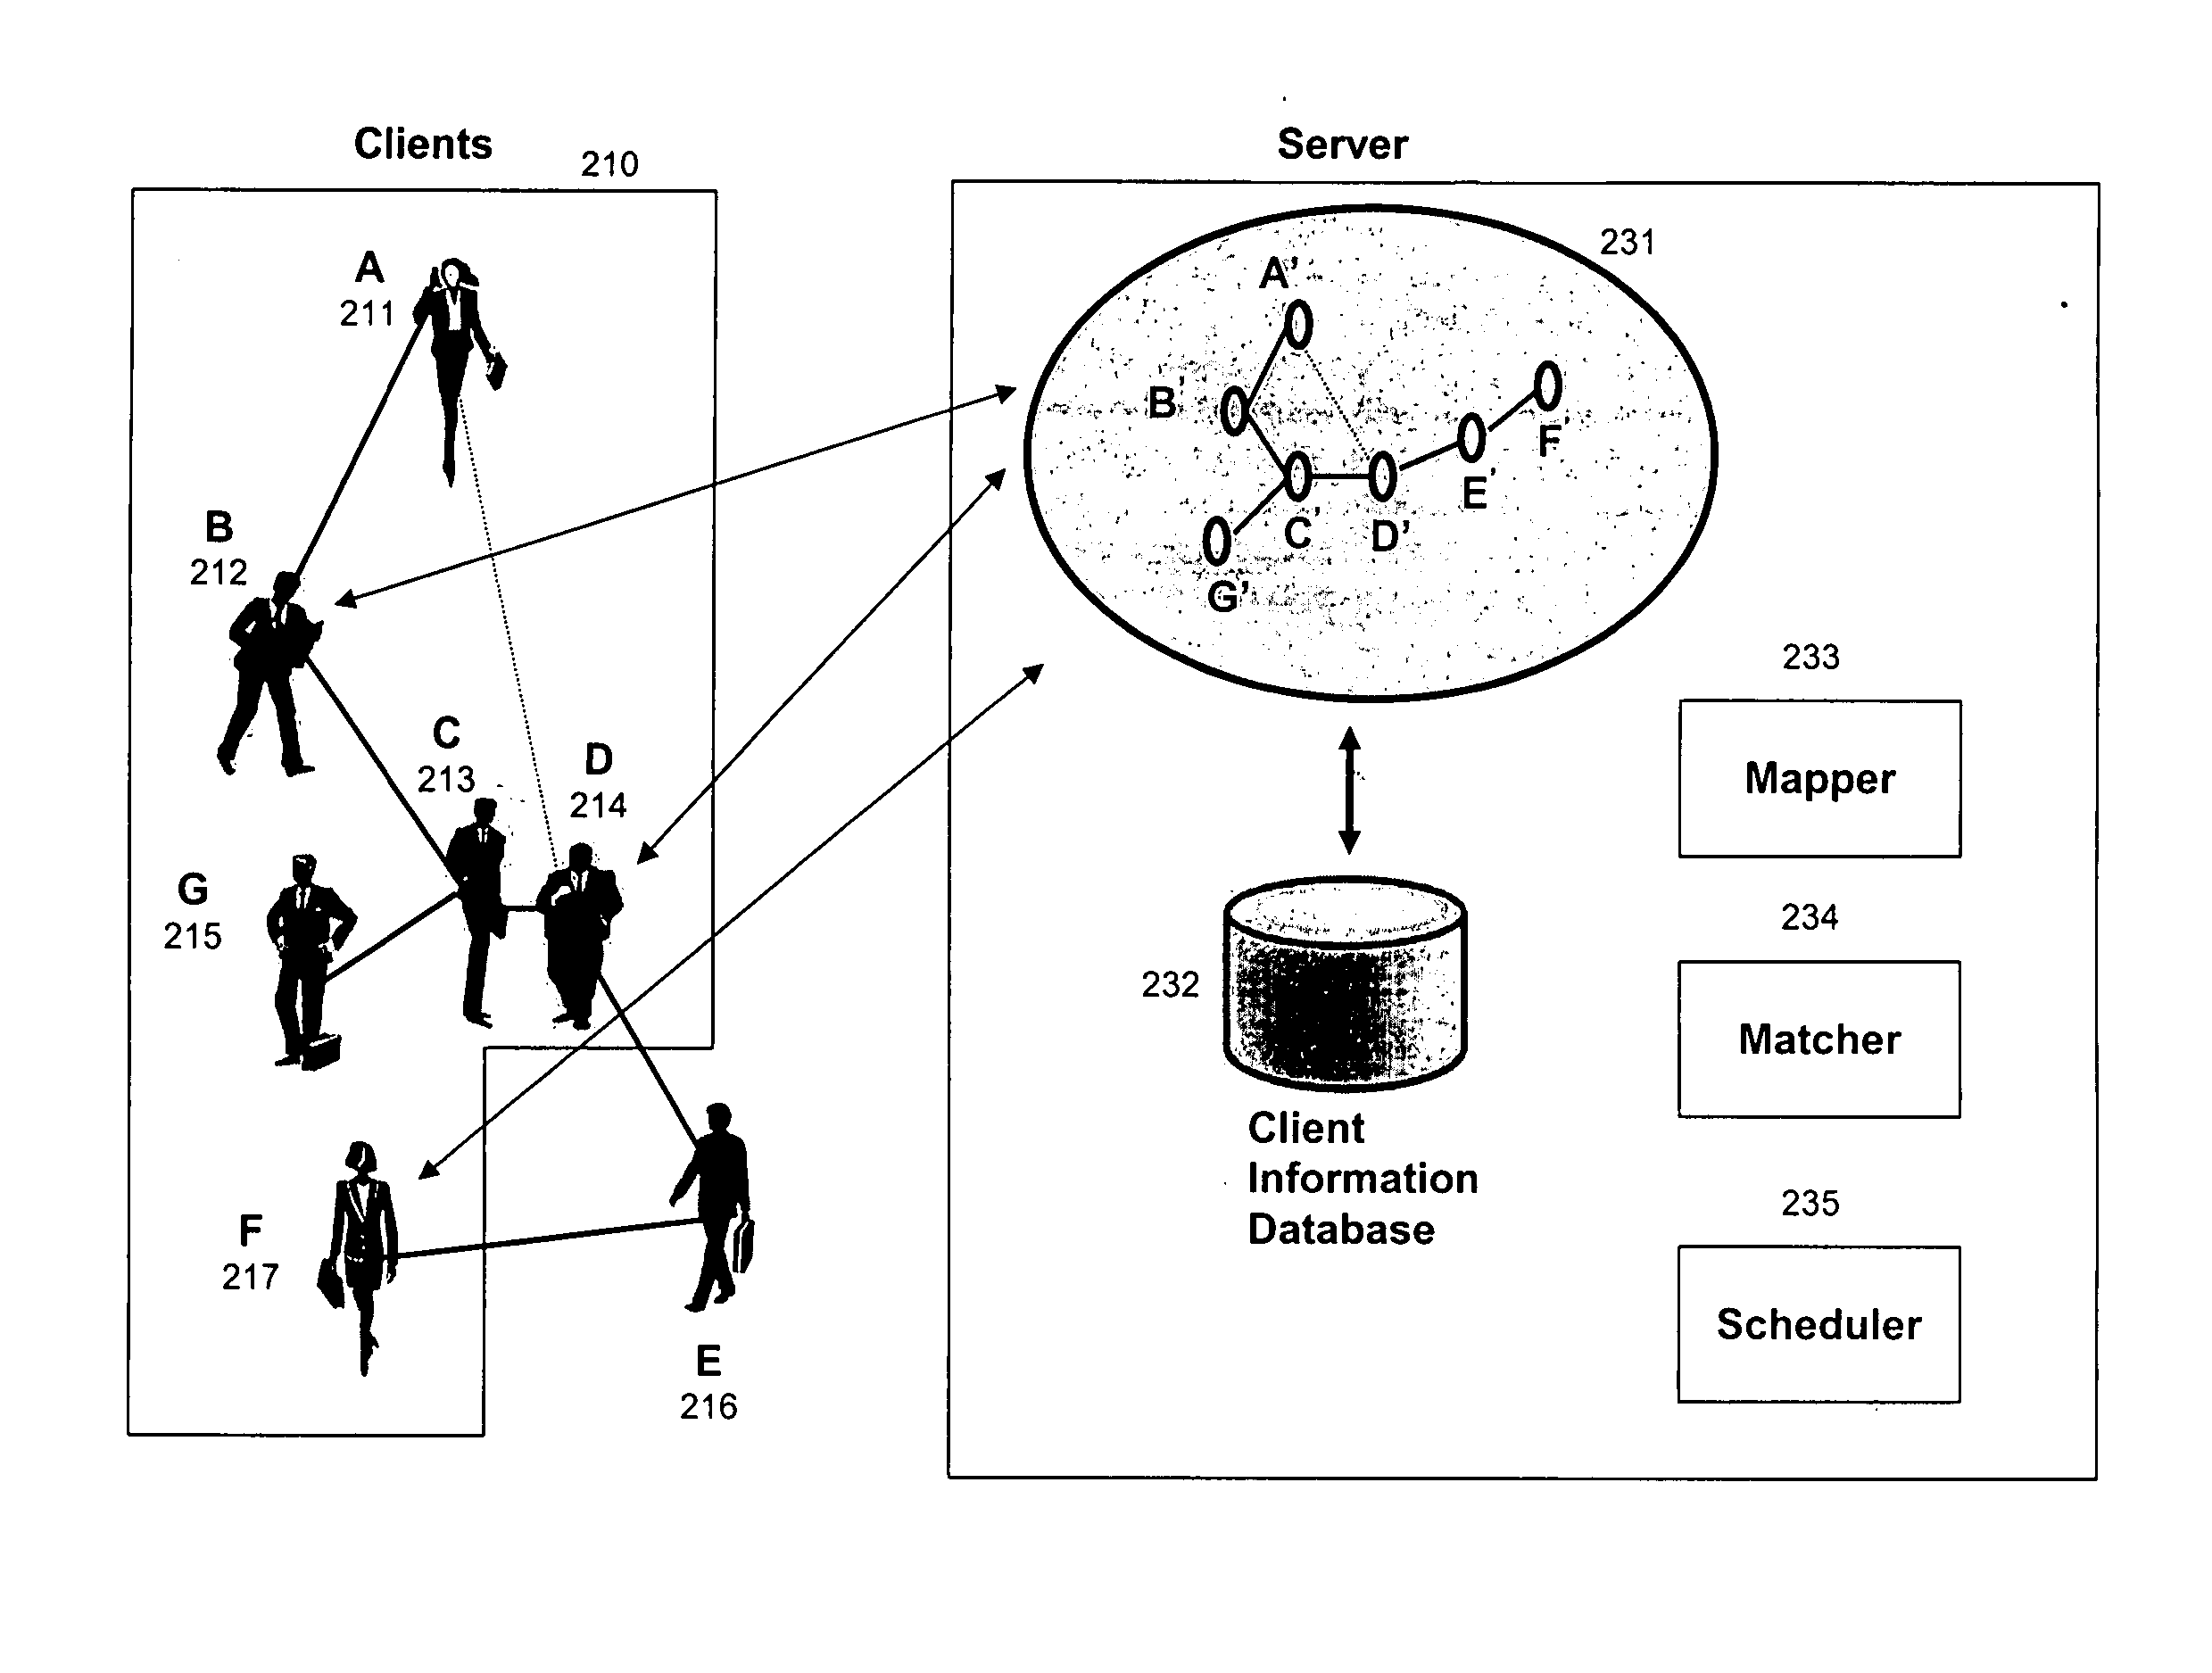 Method and system for proximity-based information retrieval and exchange in ad hoc networks